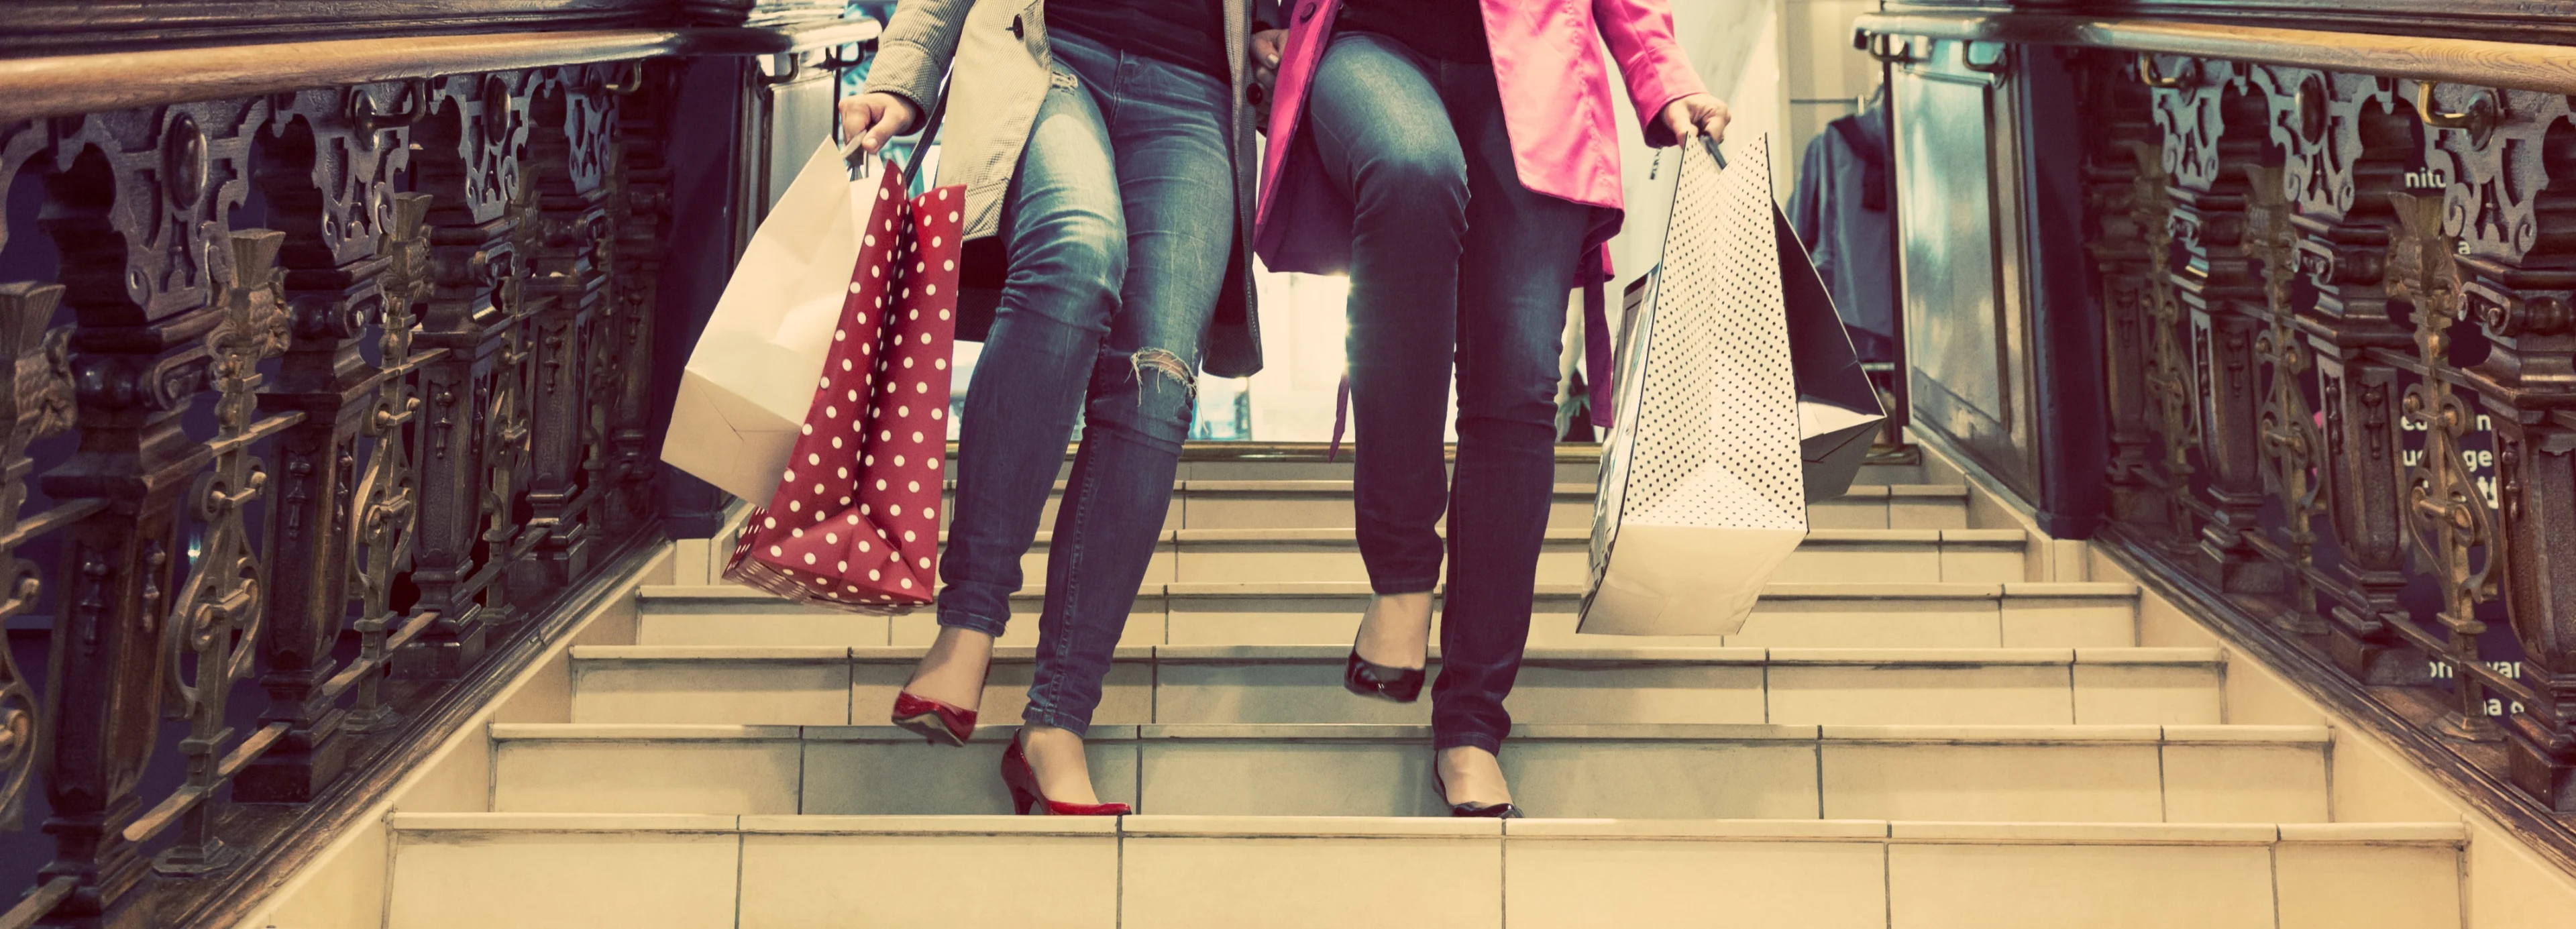 2 women carrying luxury shopping bags descend a staircase